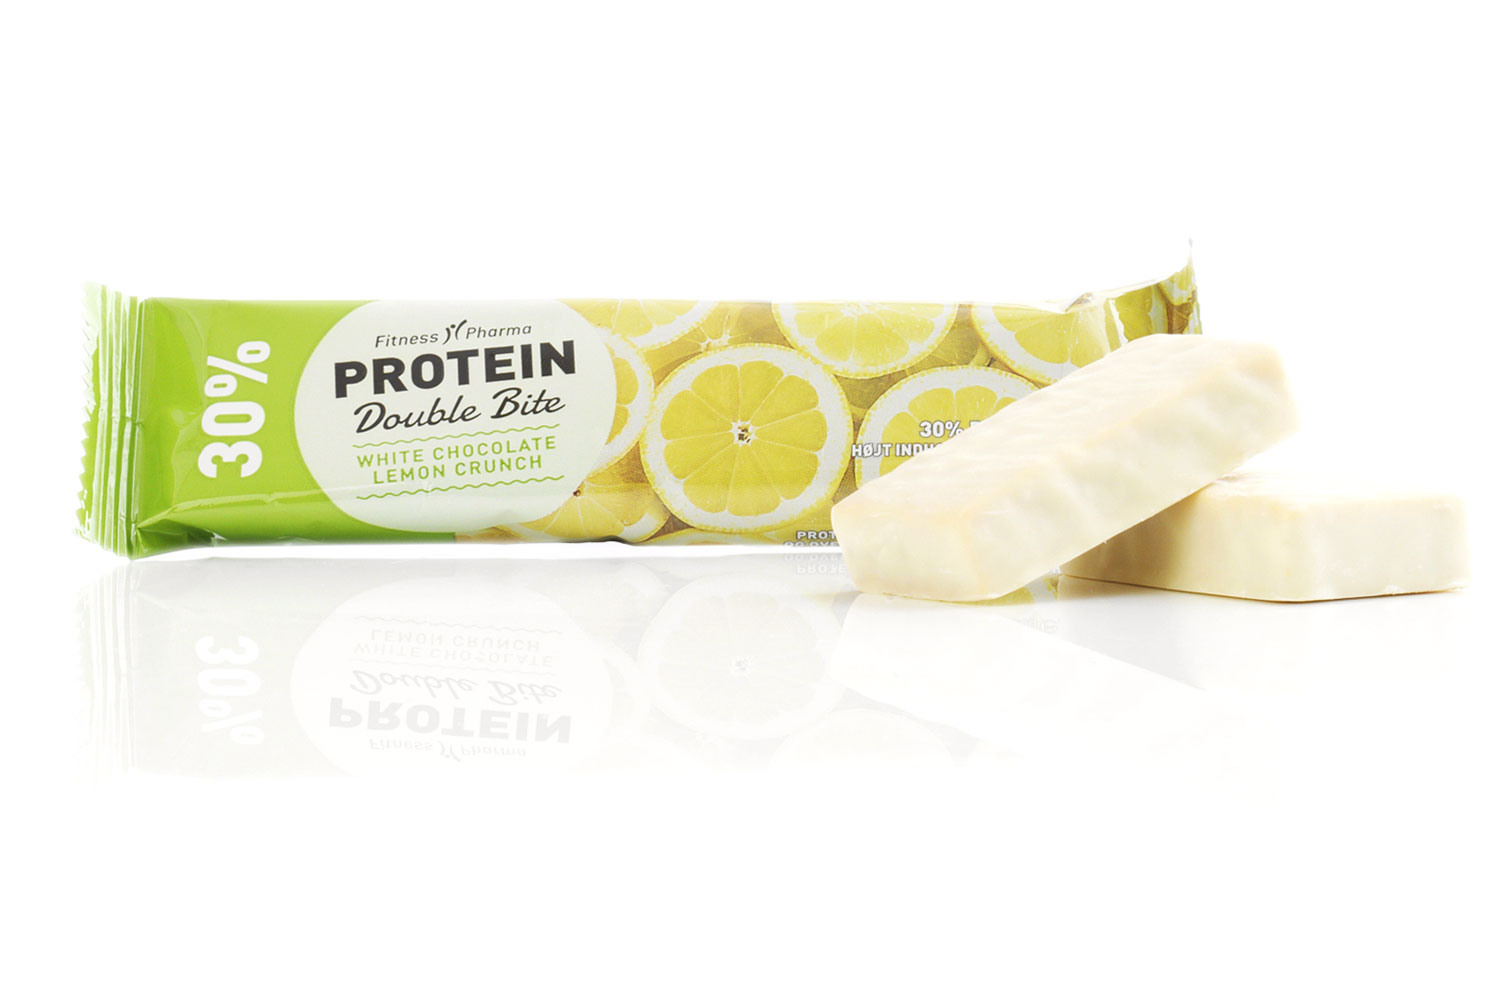 Geografi vene fordrejer Protein Double Bite by Fitness Pharma — Sunny View